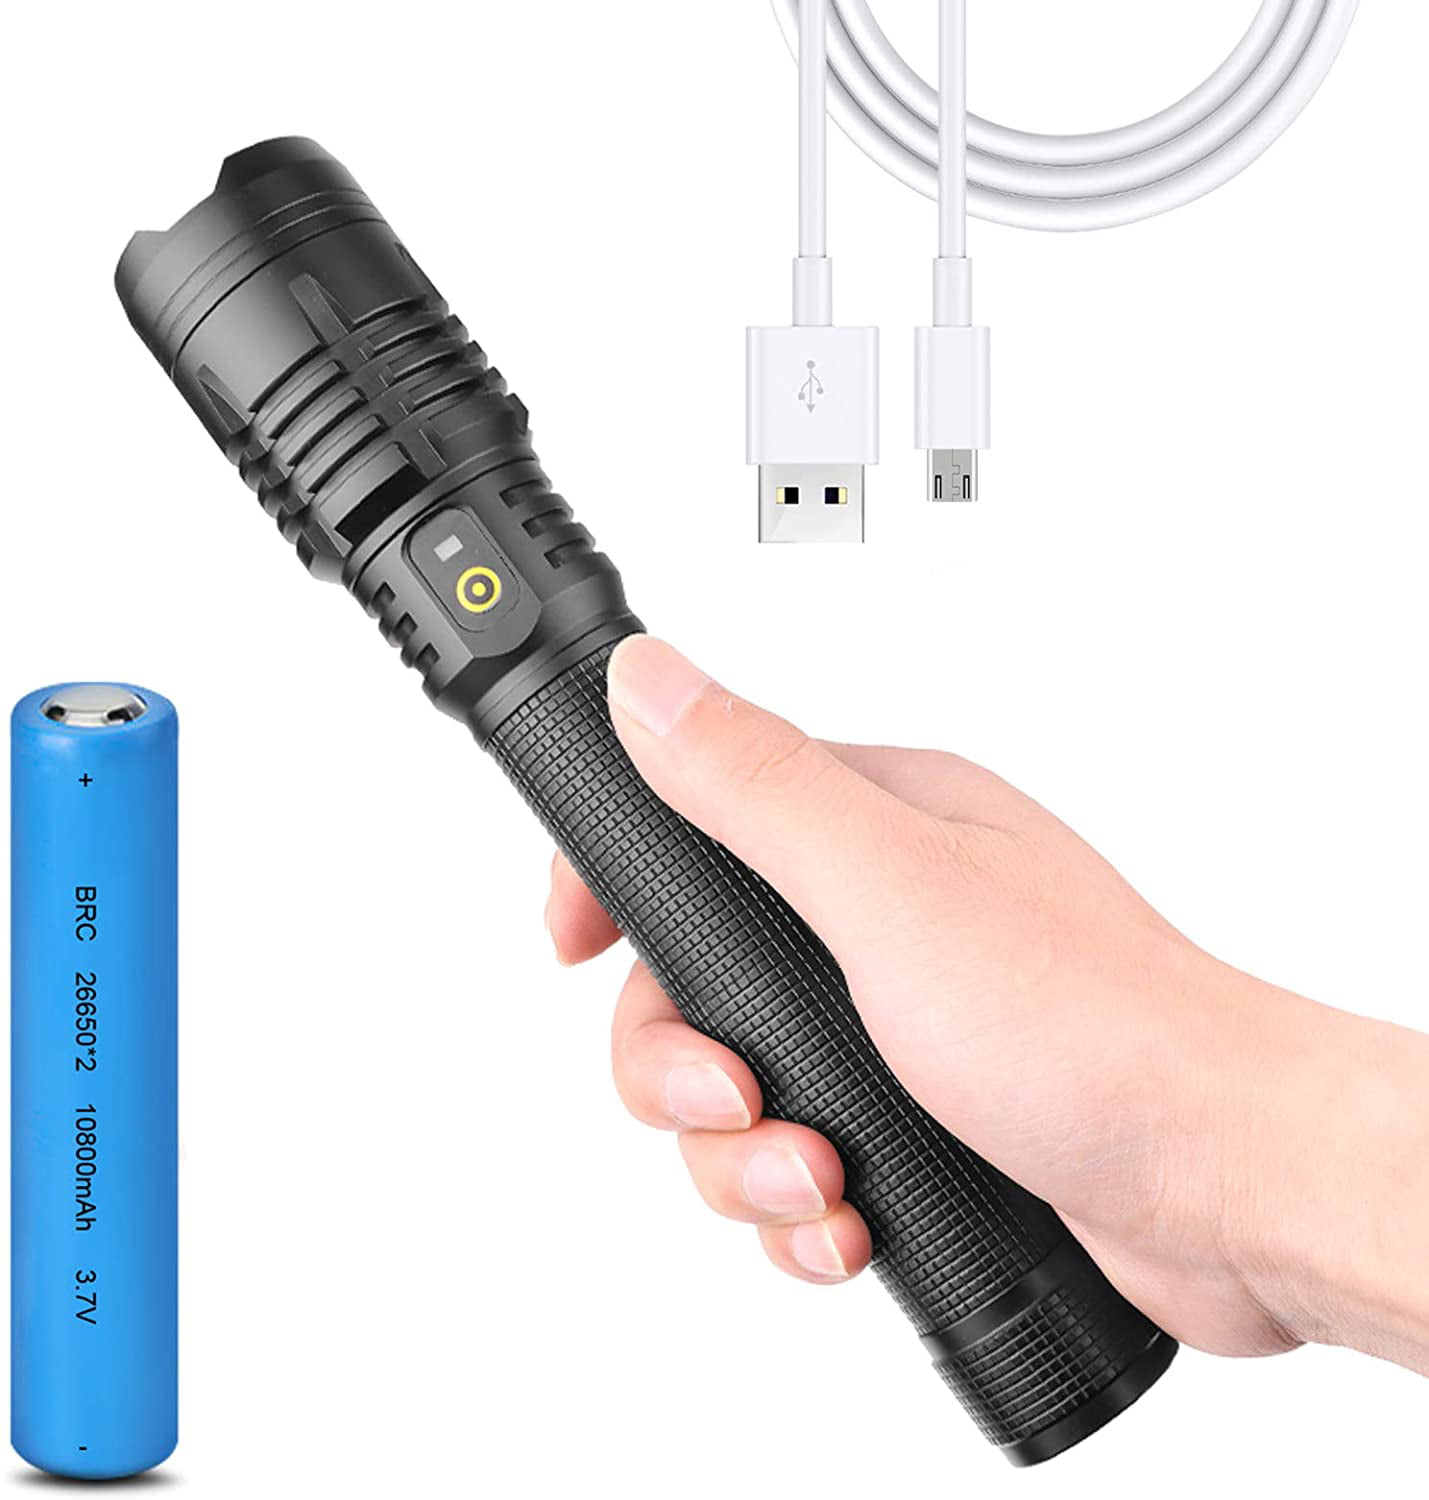 Super Bright 50000LM T6 LED Flashlight USB Rechargeable Zoom Torch 3Mode Camping 